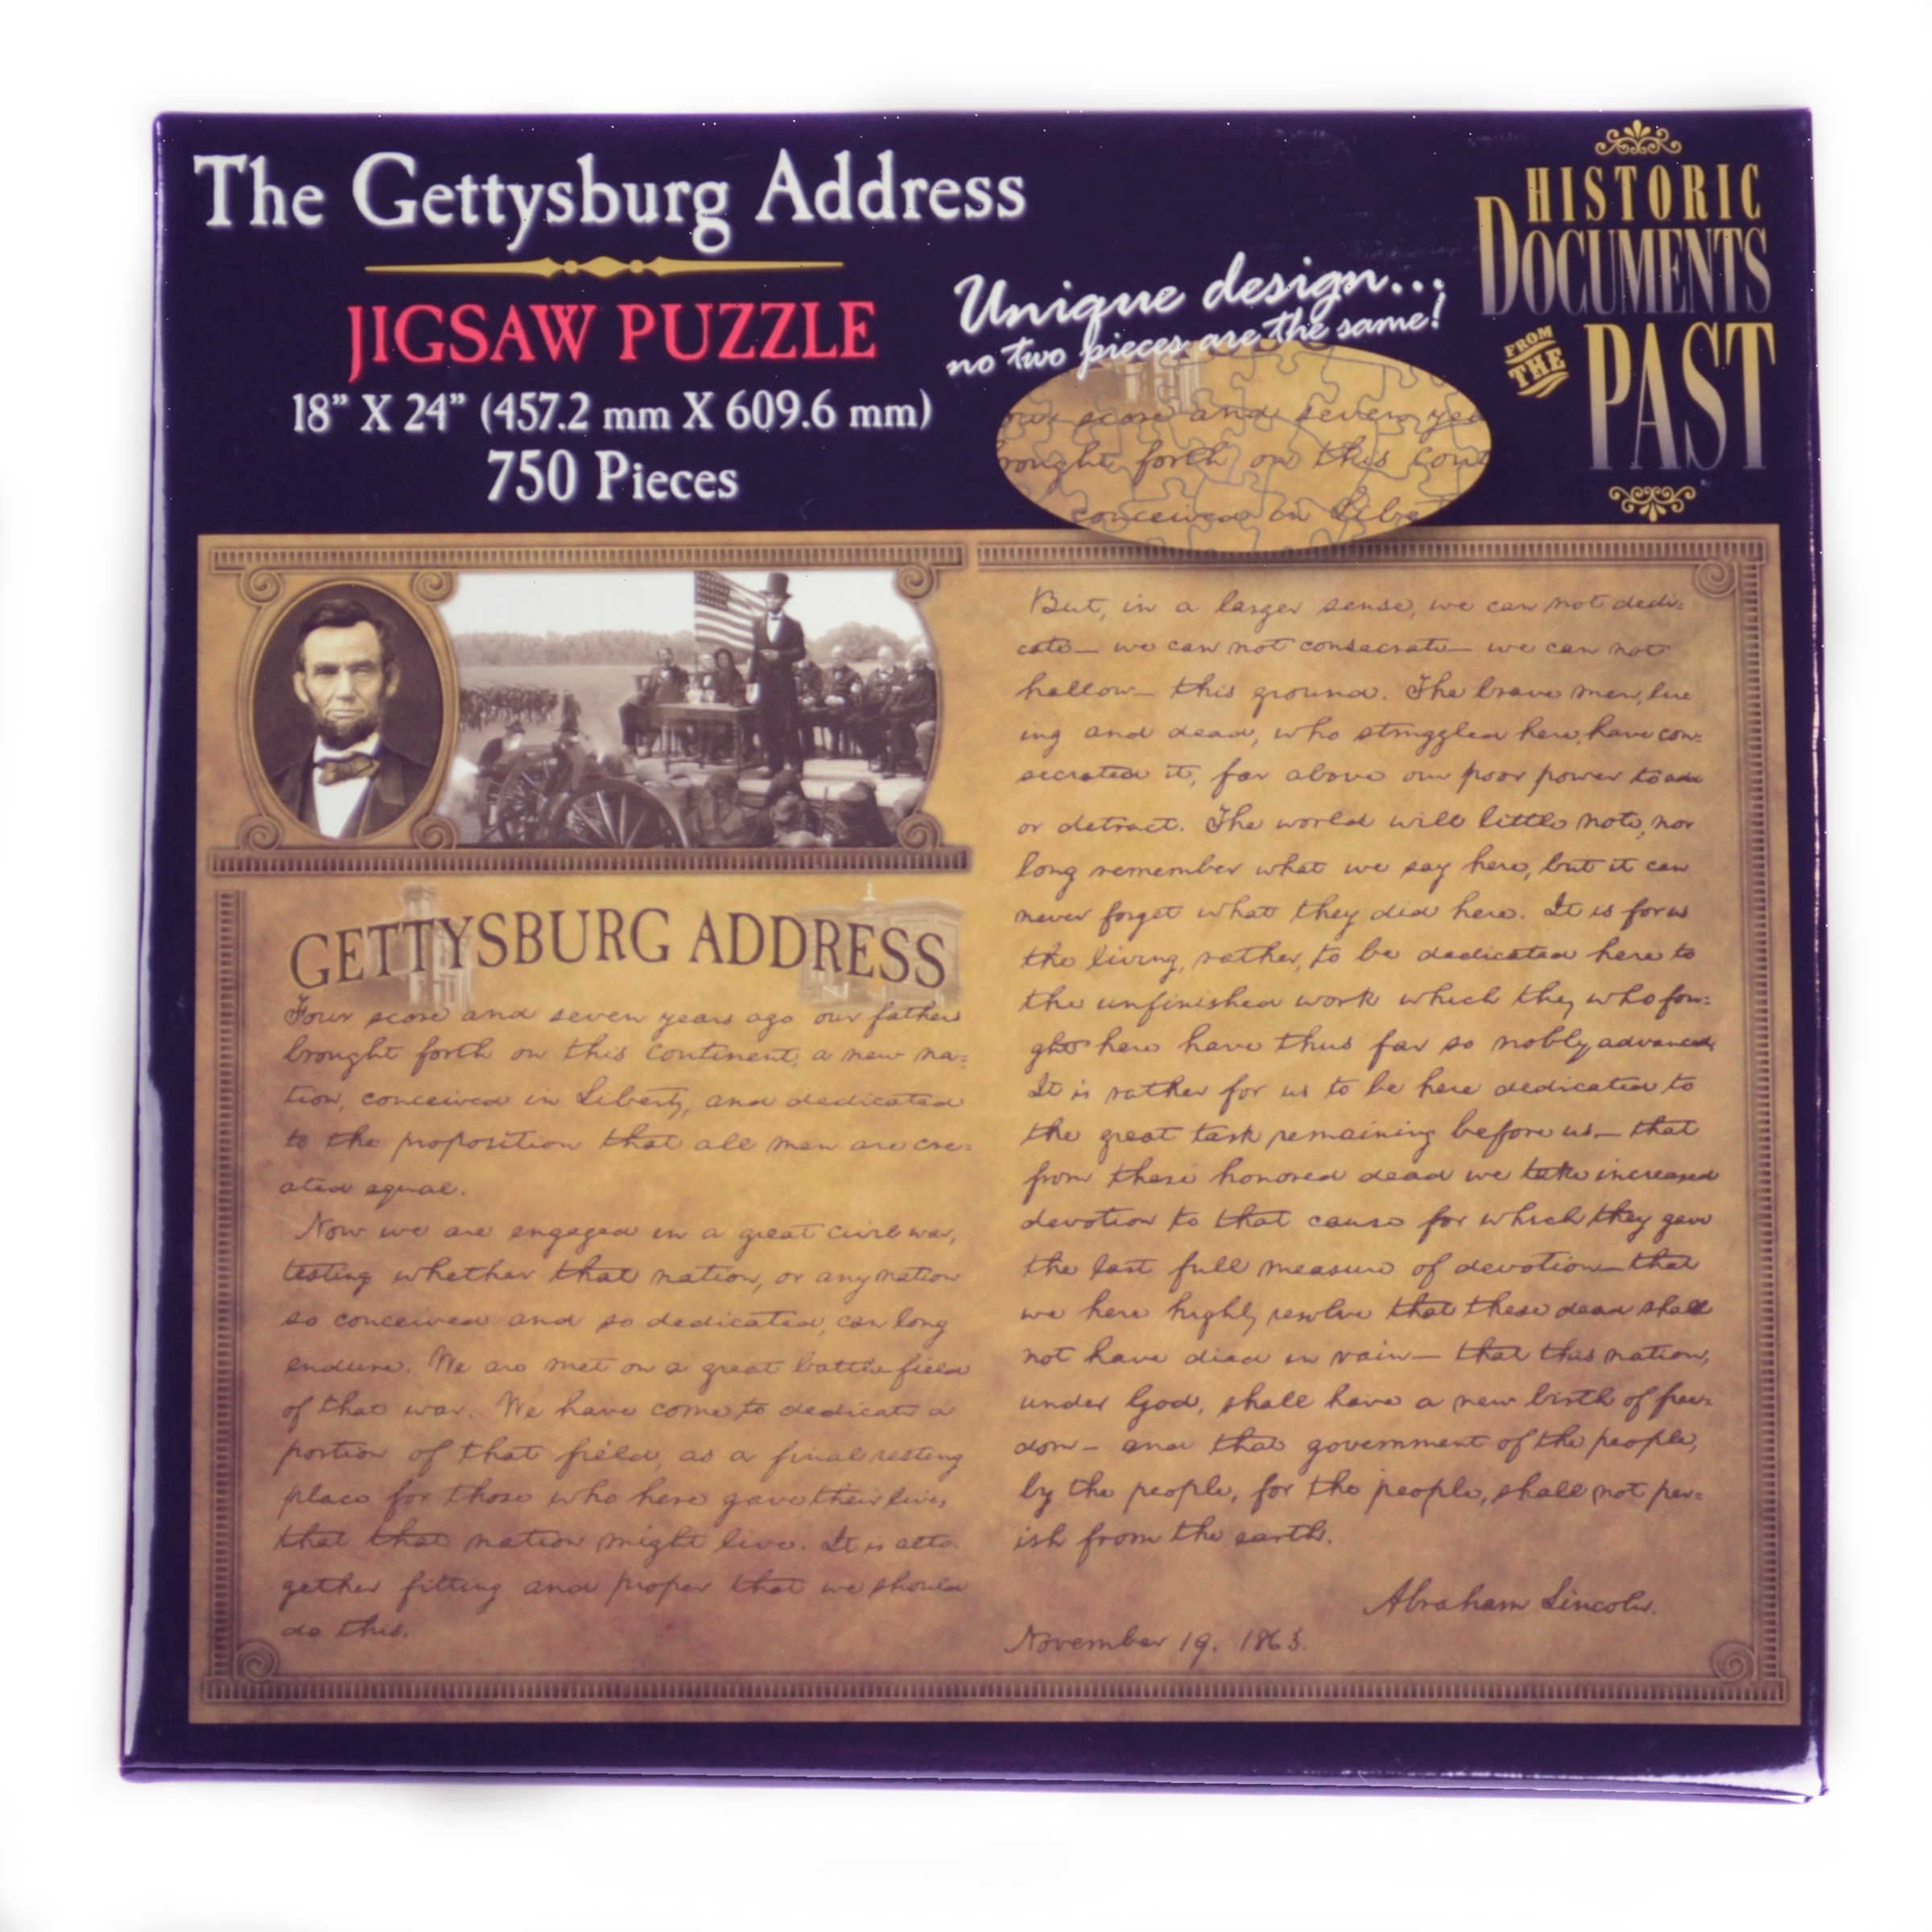 The Gettysburg Address 18" x 24" 750 Pieces Jigsaw Puzzle New Factory Sealed 